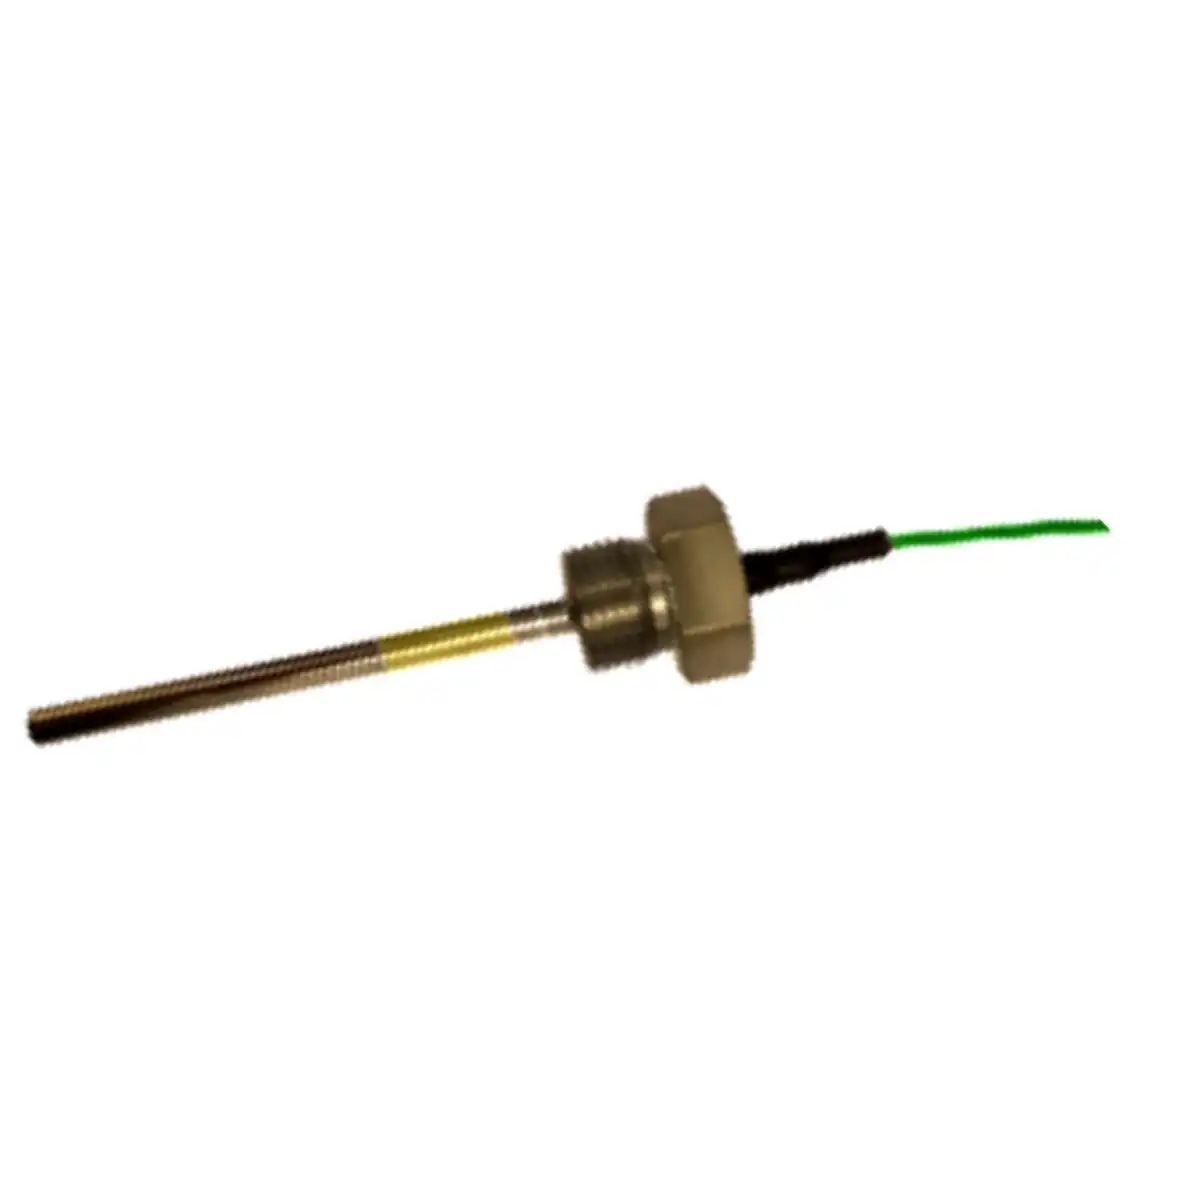 Type K Thermocouple with Fixed Process Connection